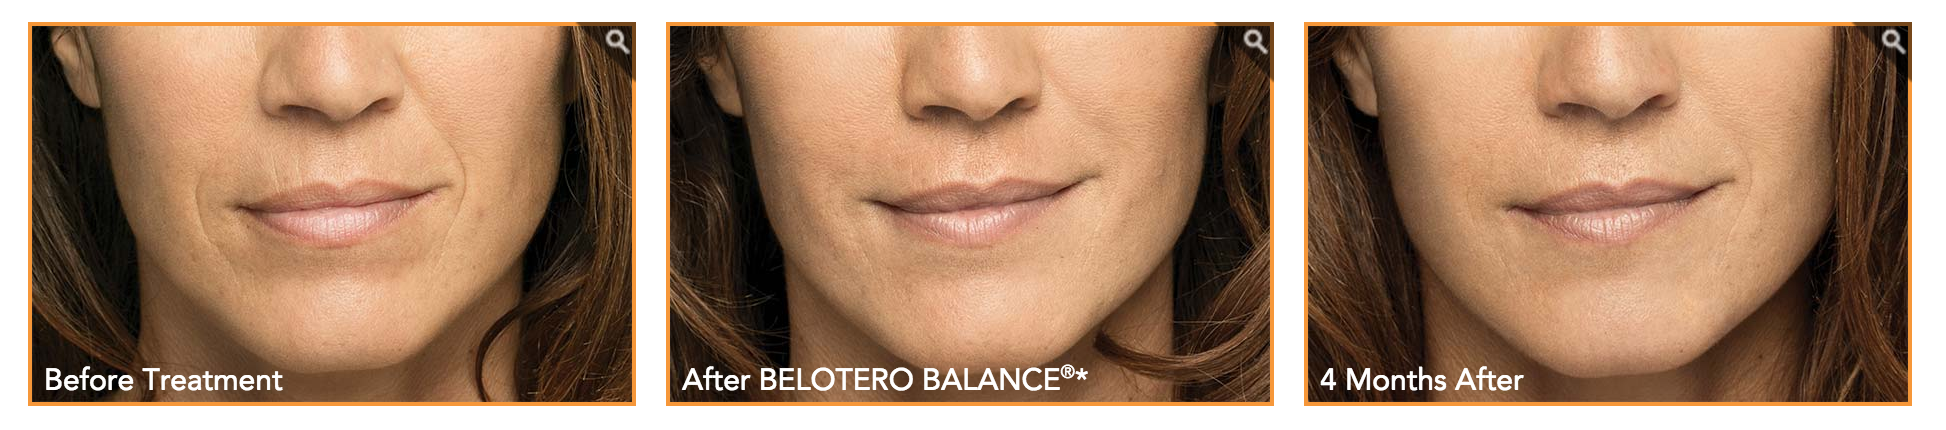 Belotero before and after results